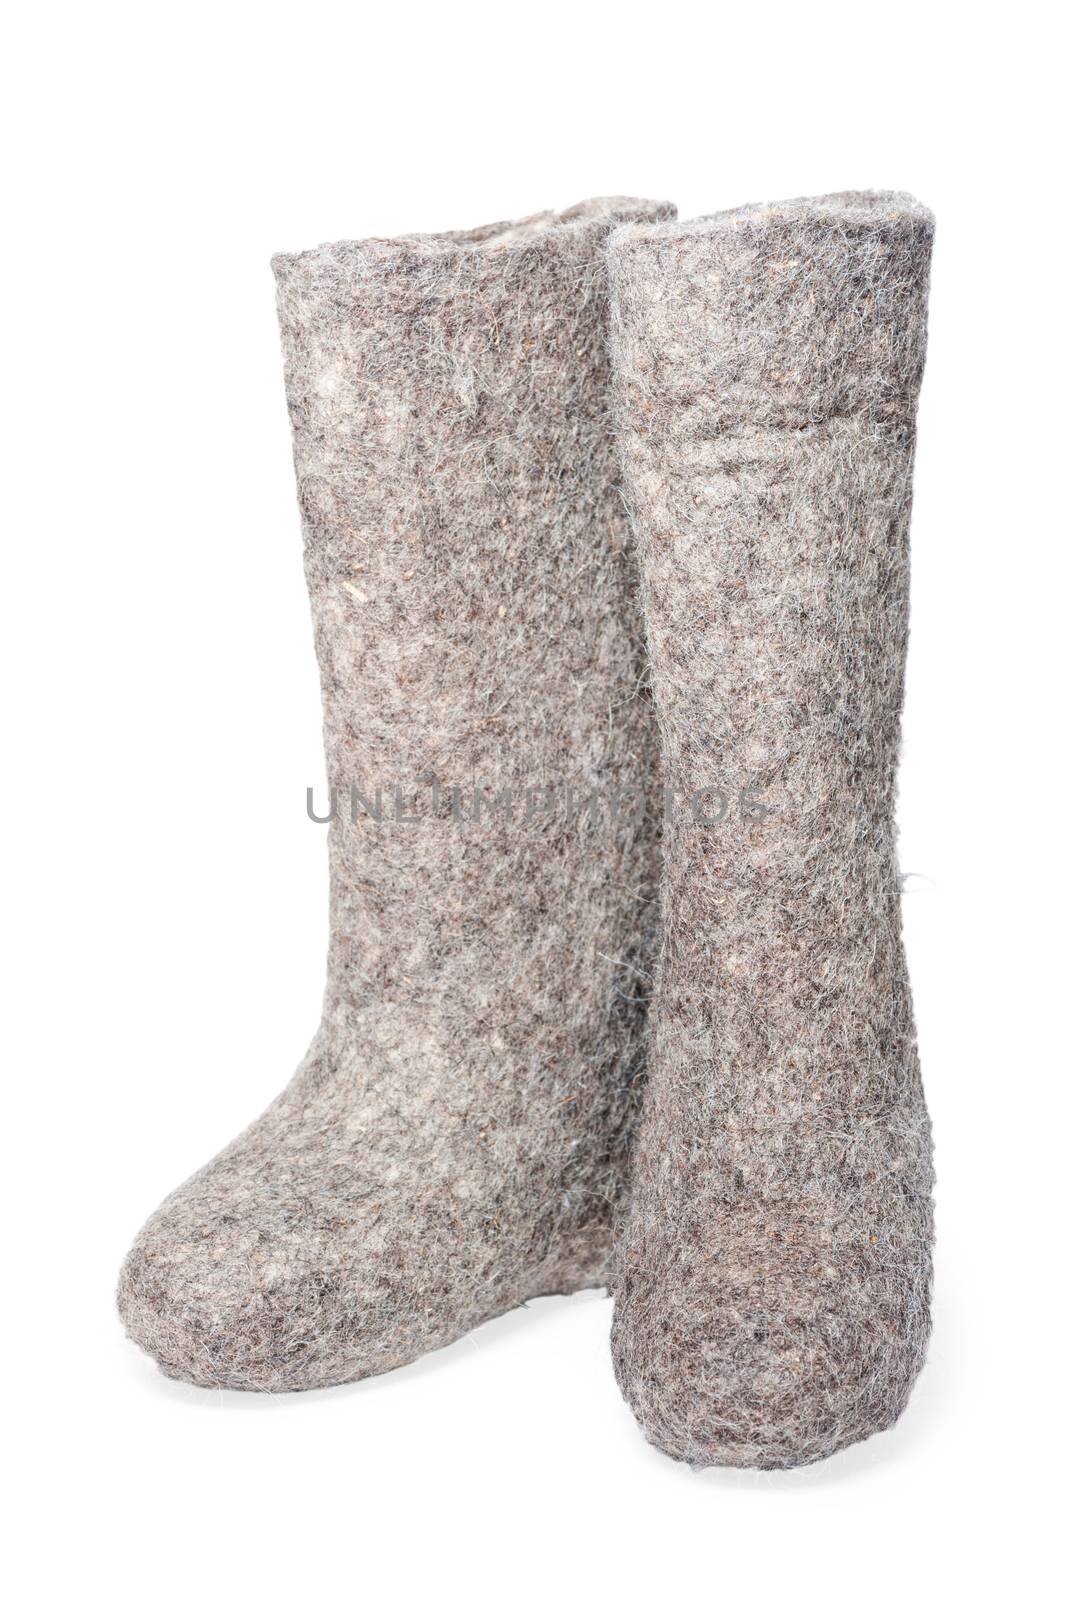 Felt boots gray on white background by kosmsos111